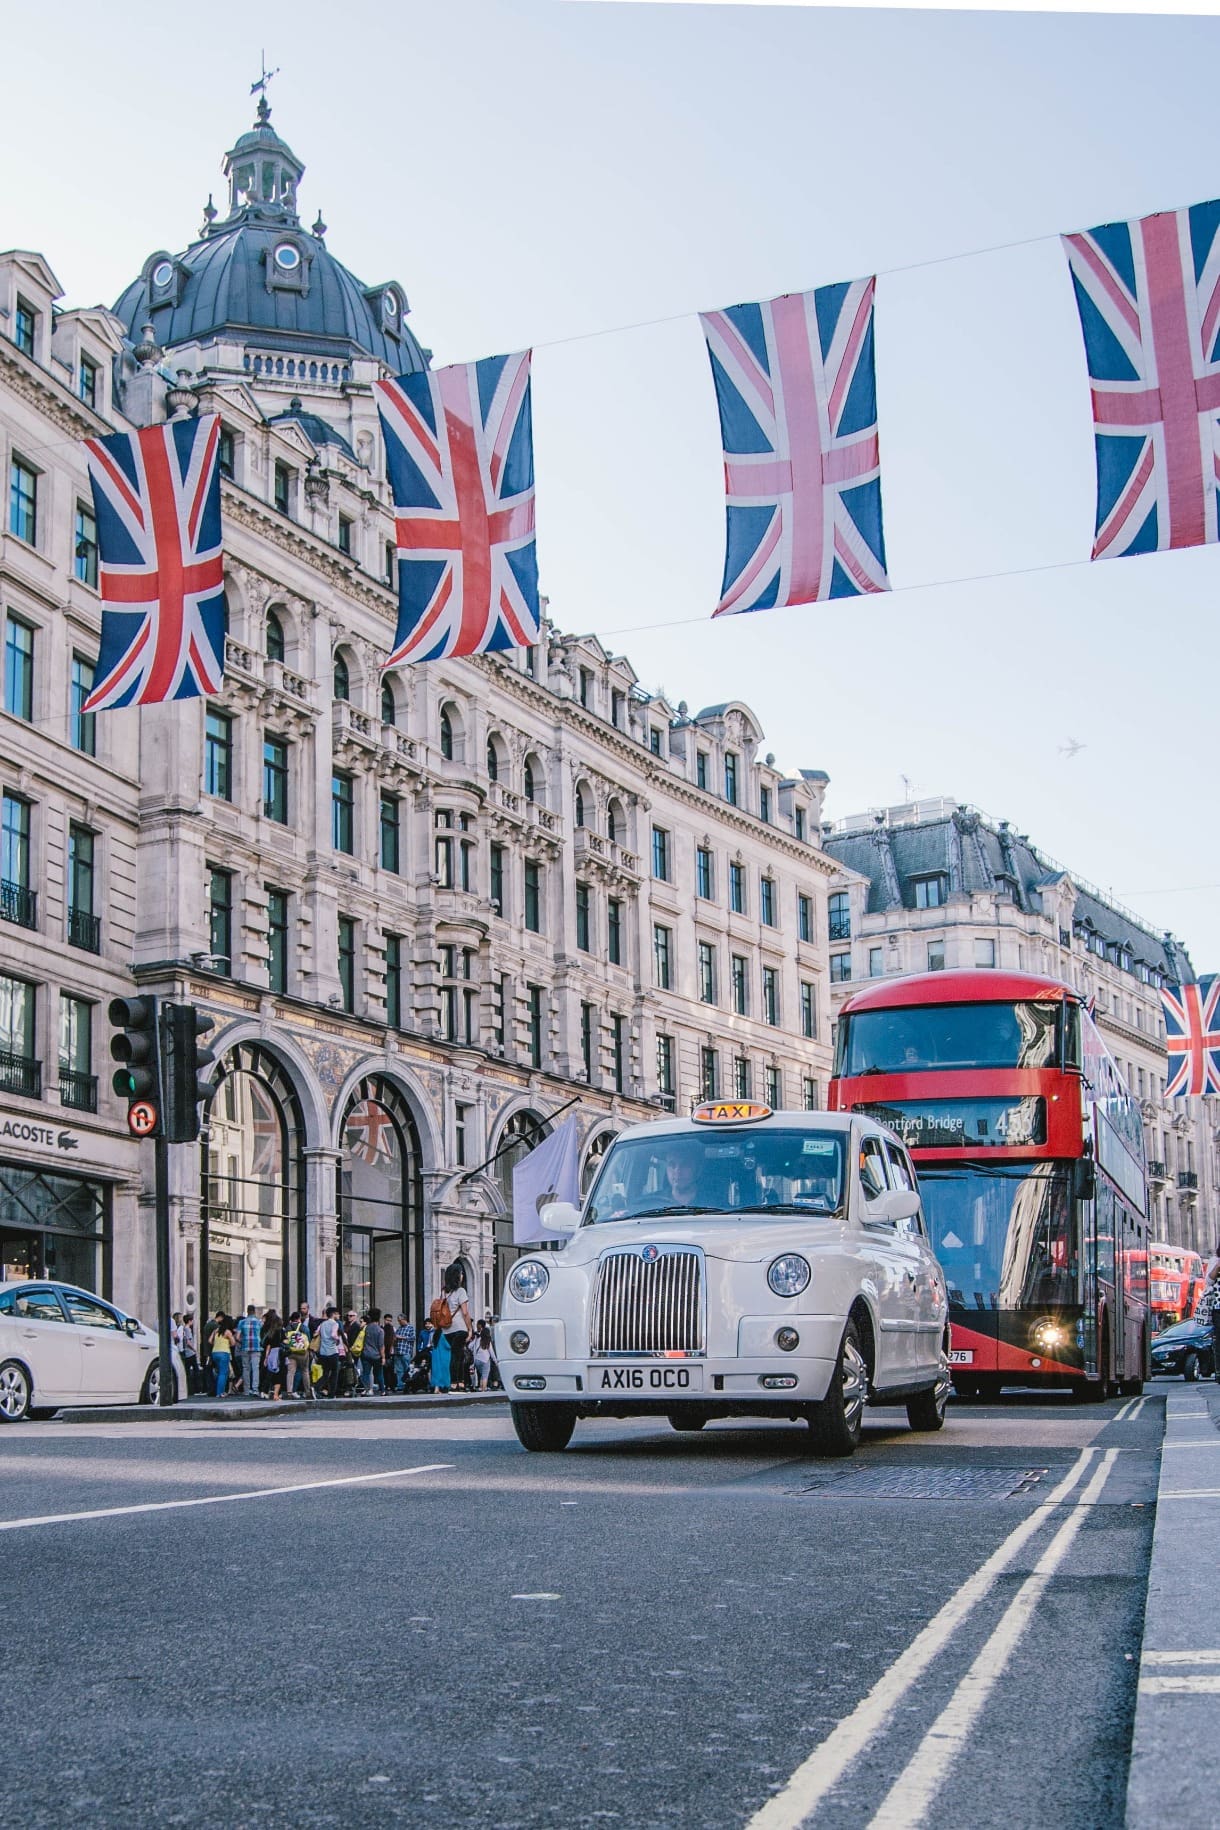 Picture of a street in London with a taxi and bus on the road and union jack bunting